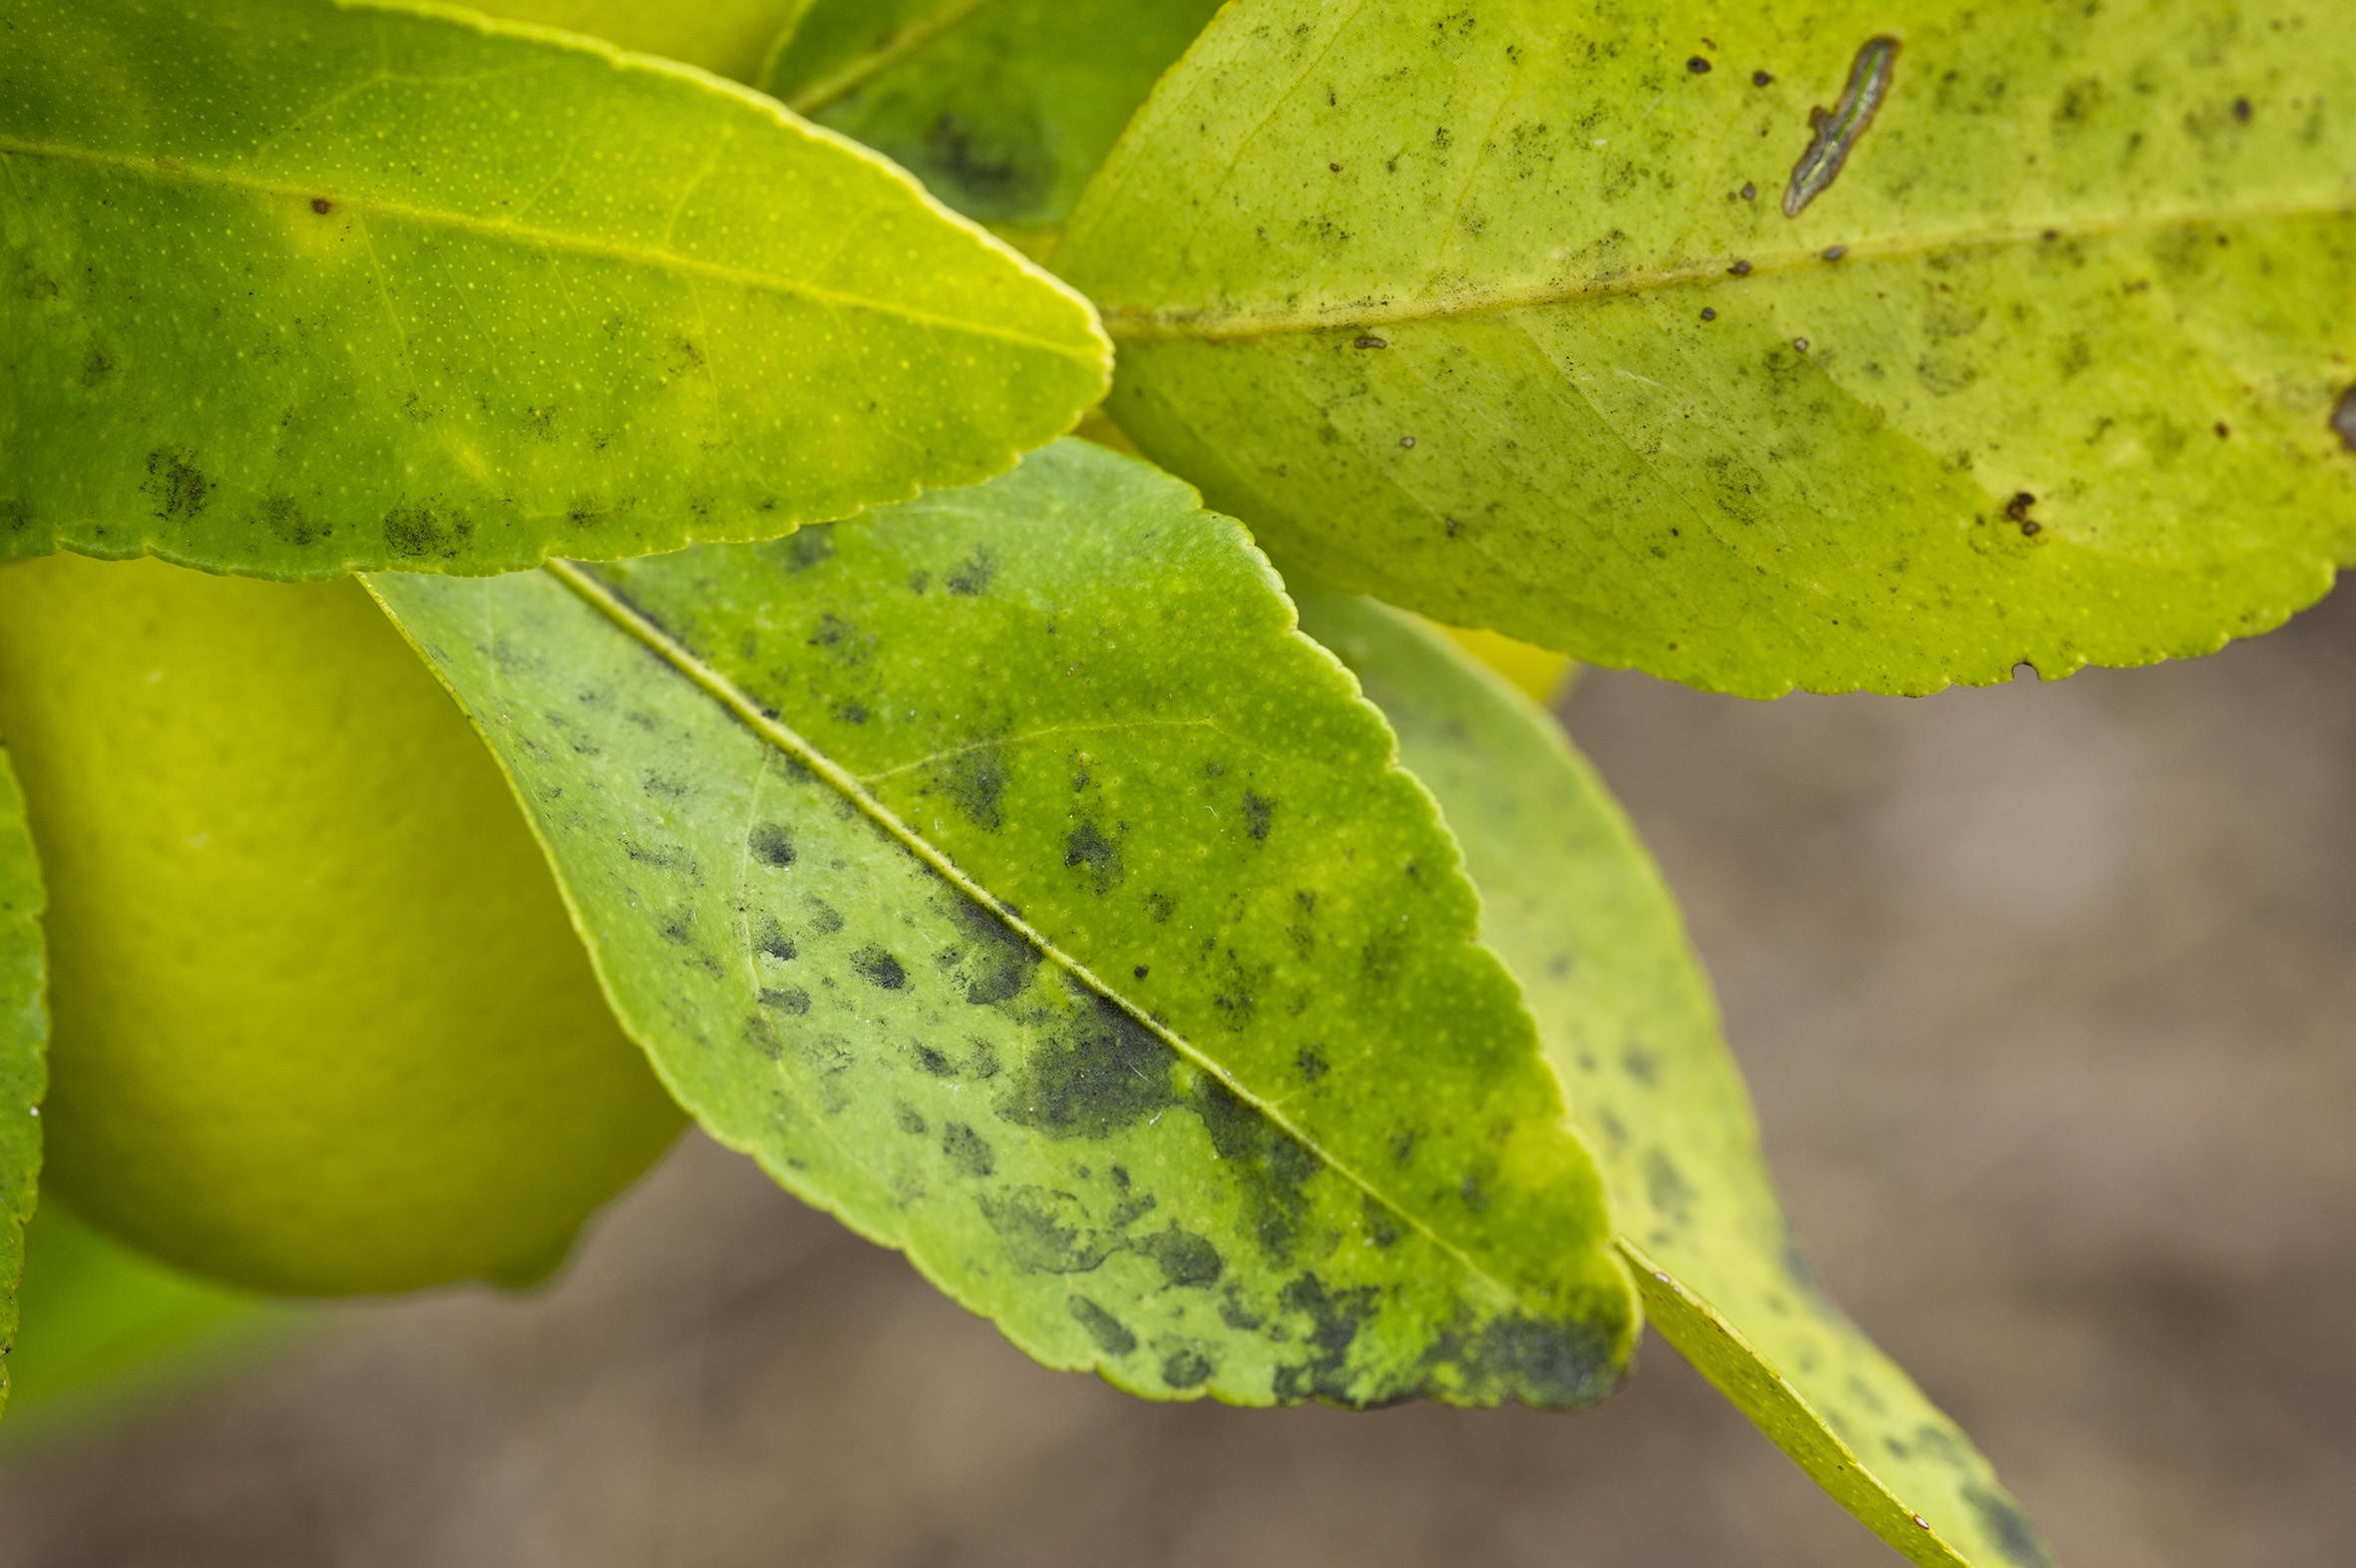 Sooty mould on citrus leaves